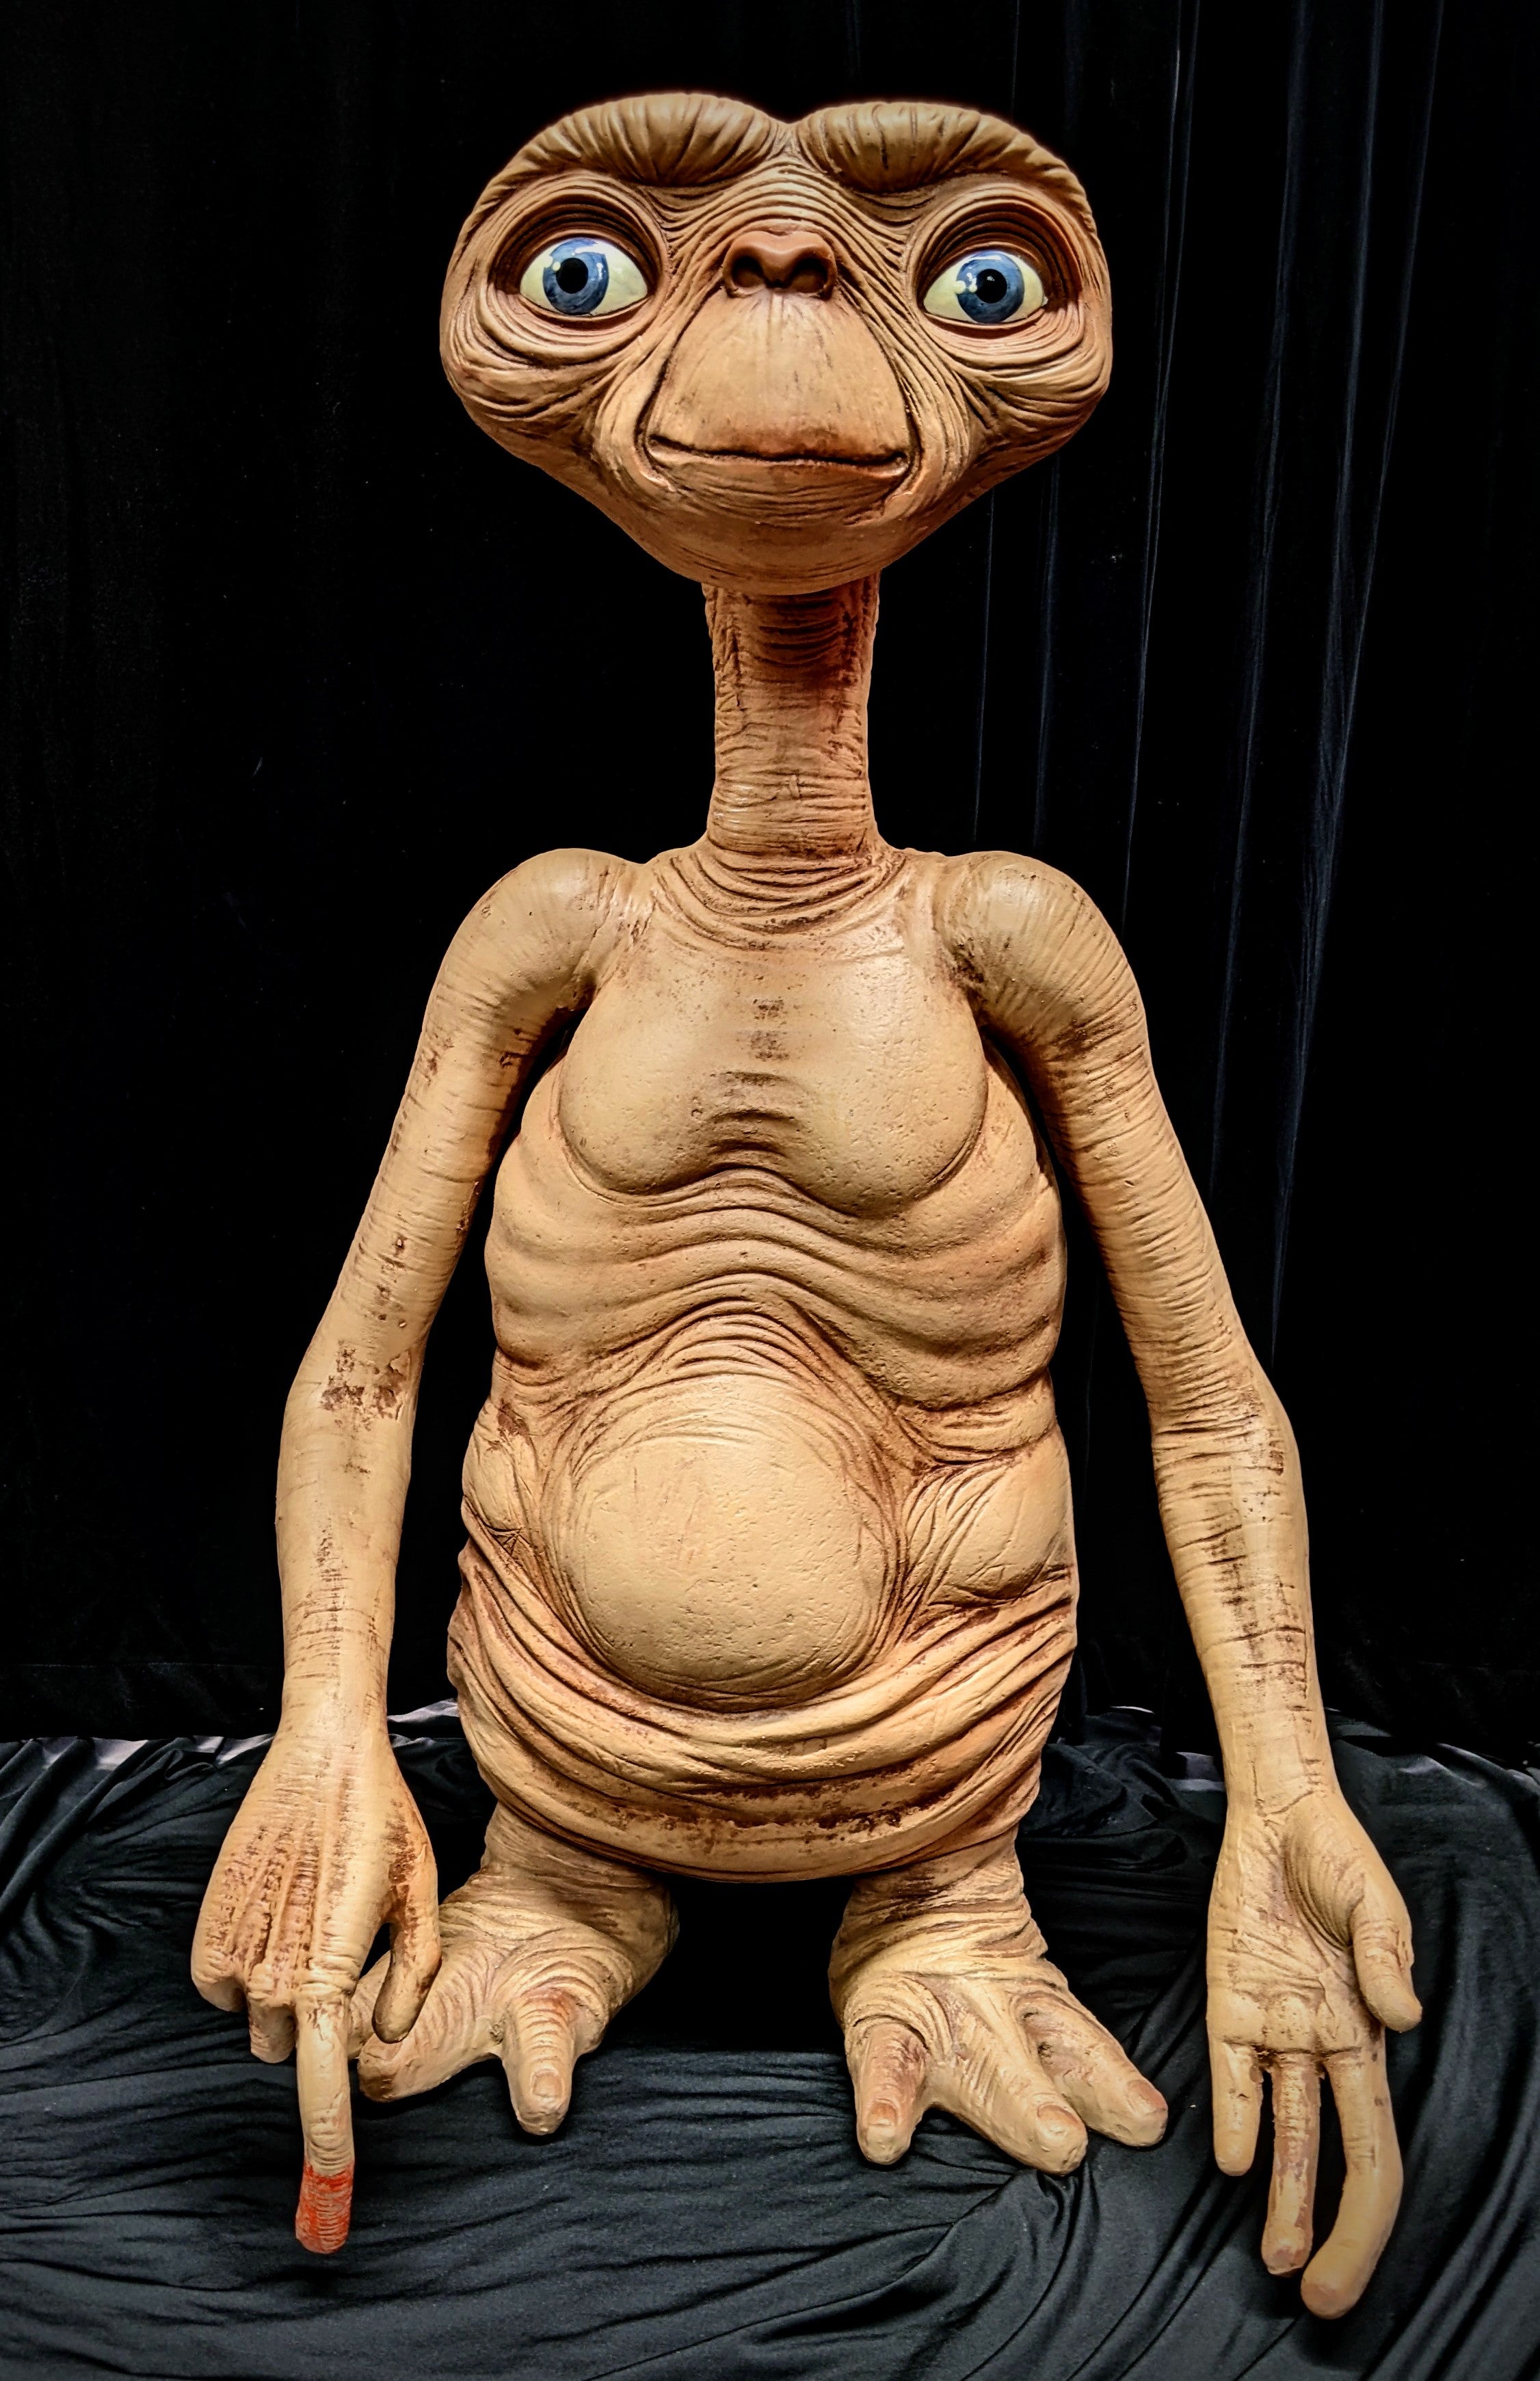  NECA - E.T. the Extra-Terrestrial - 7 scale action